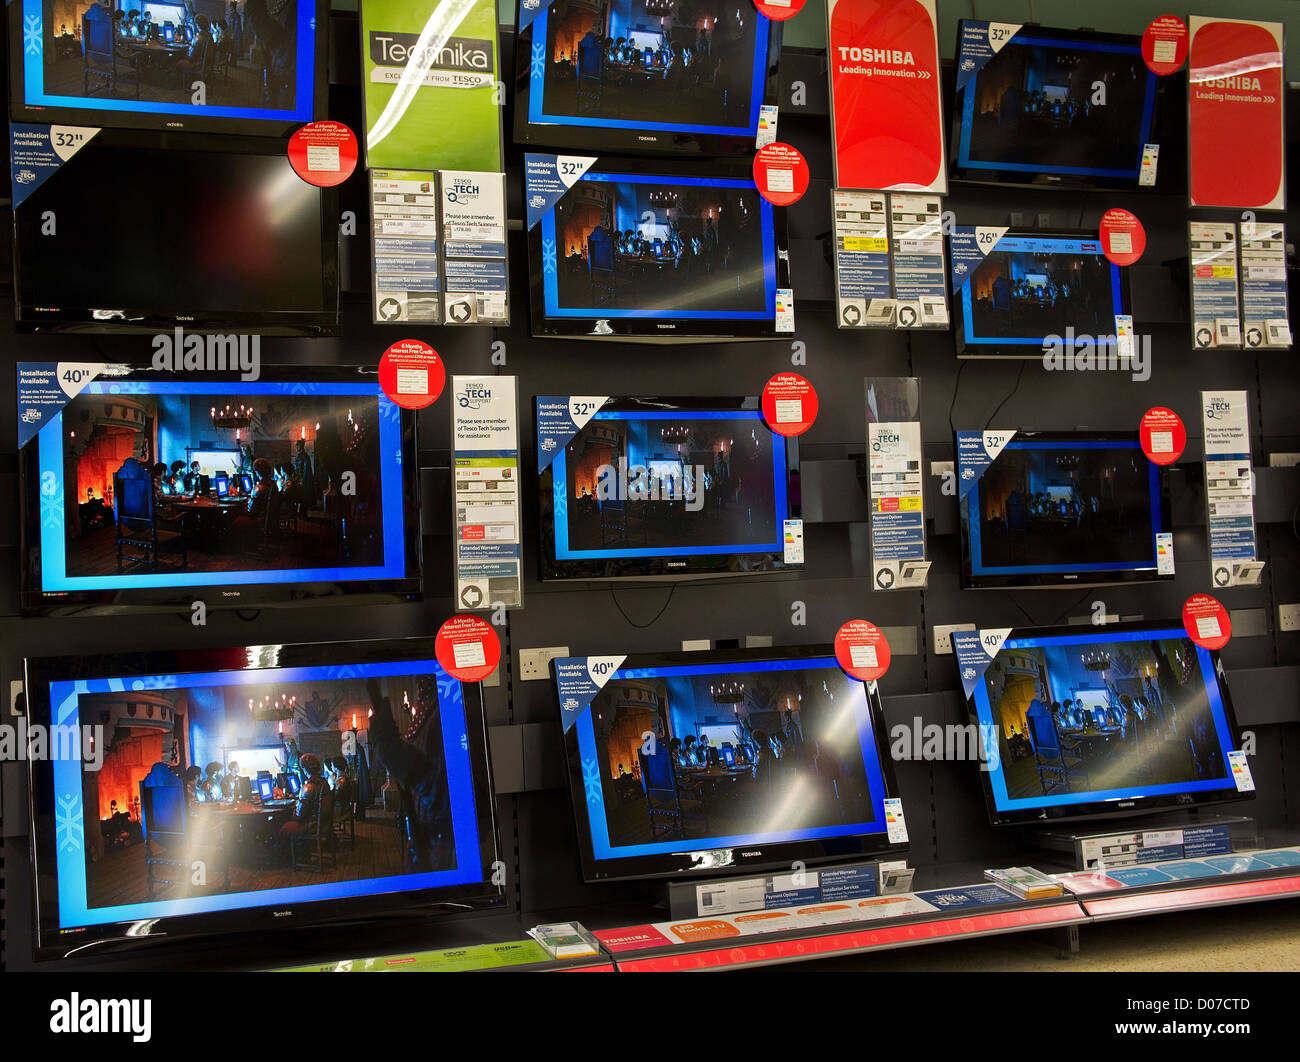 flat screen television sets for sale in uk supermarket Stock Photo